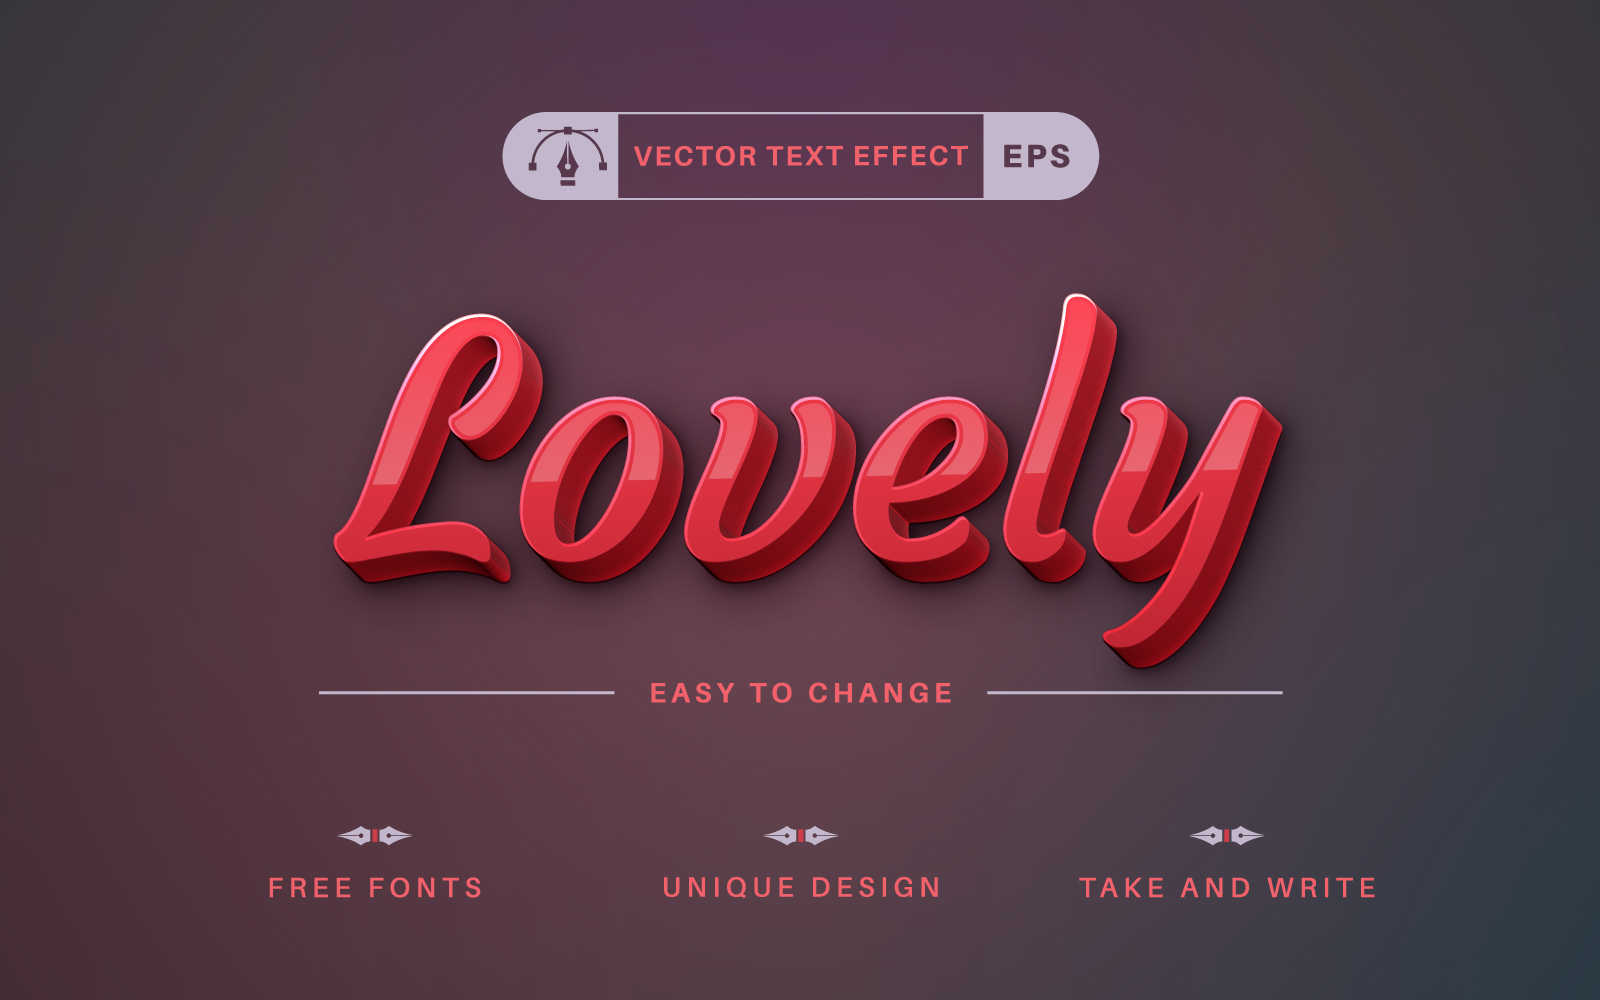 Lovely - Editable Text Effect, Font Style